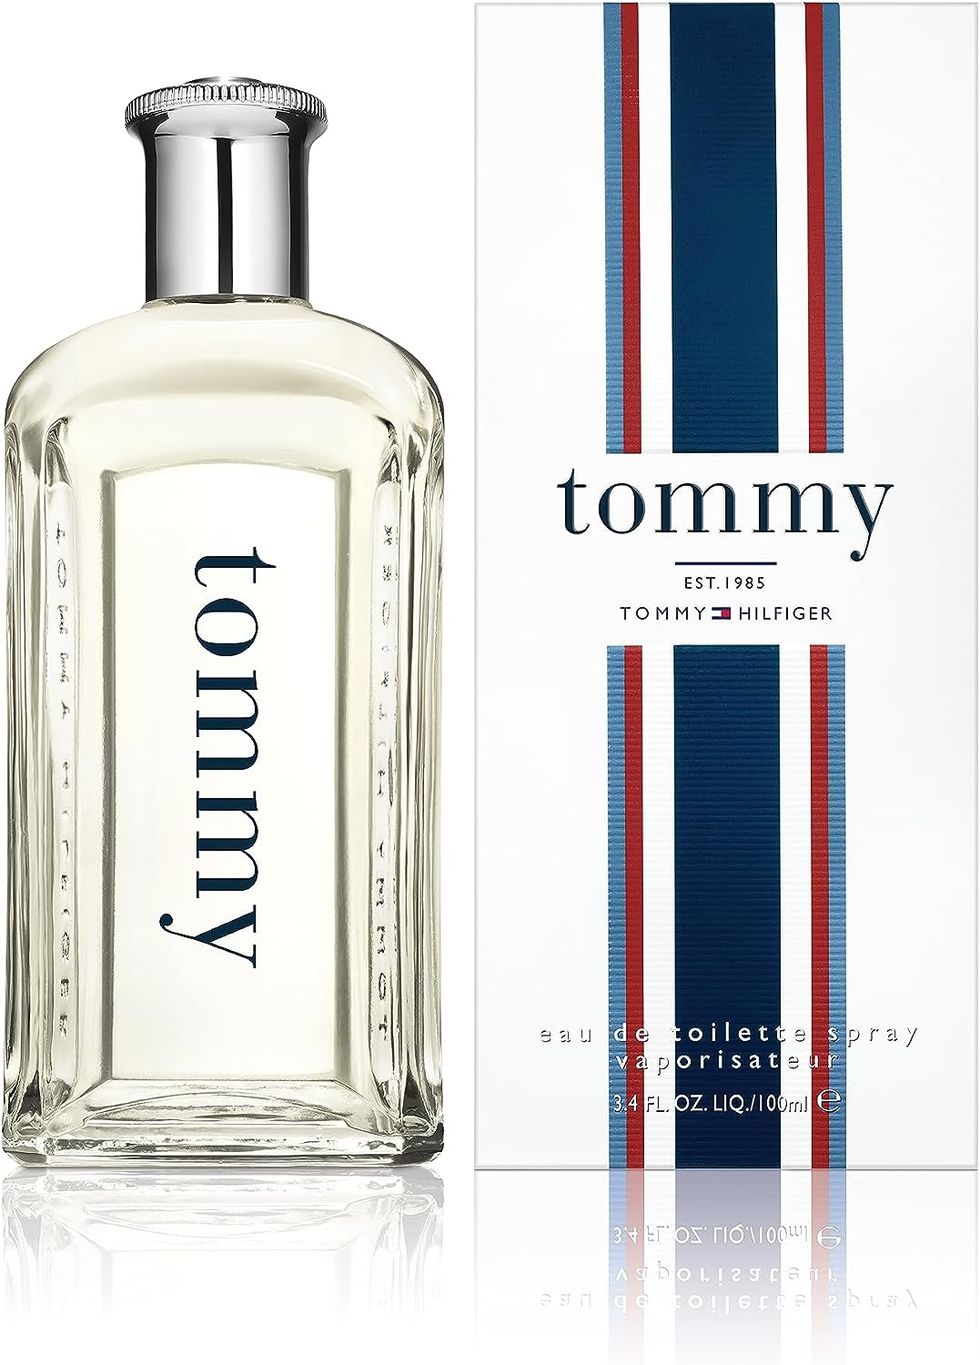 colonia tommy, de tommy hilfiger